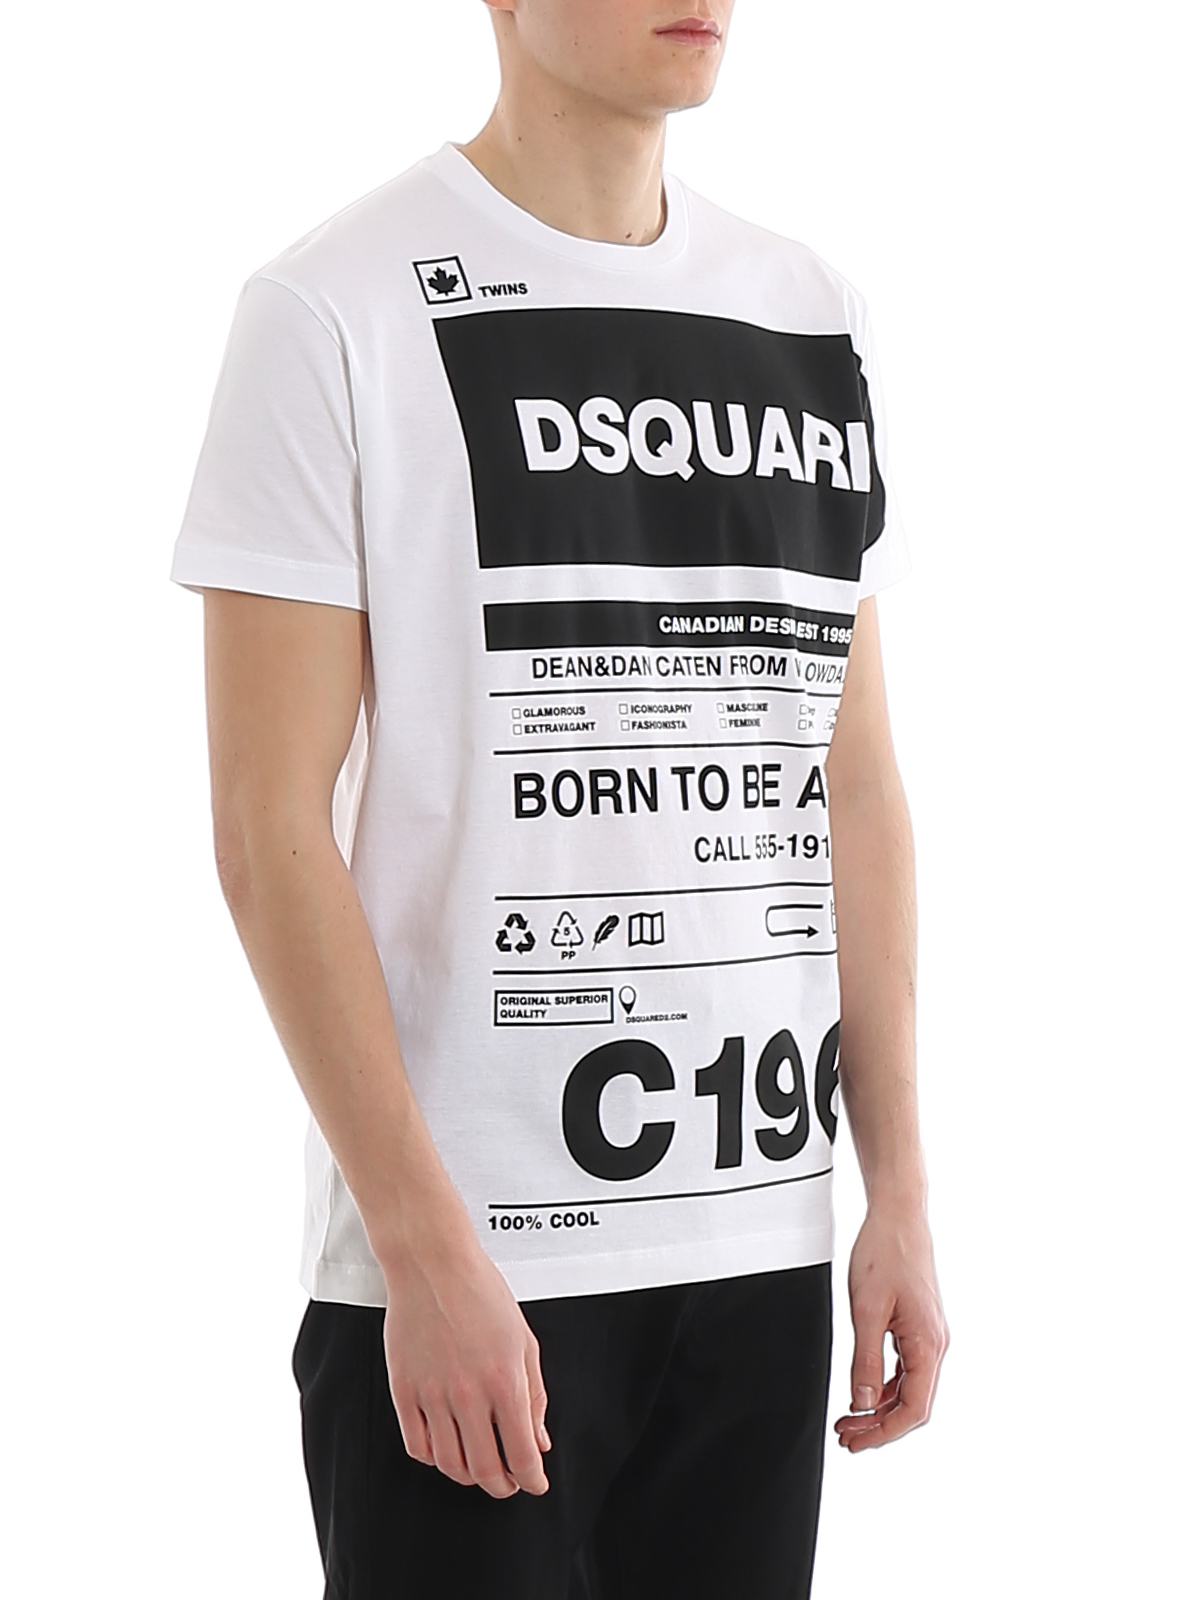 Tシャツ Dsquared2 - Tシャツ - 白 - S74GD0697S22427100